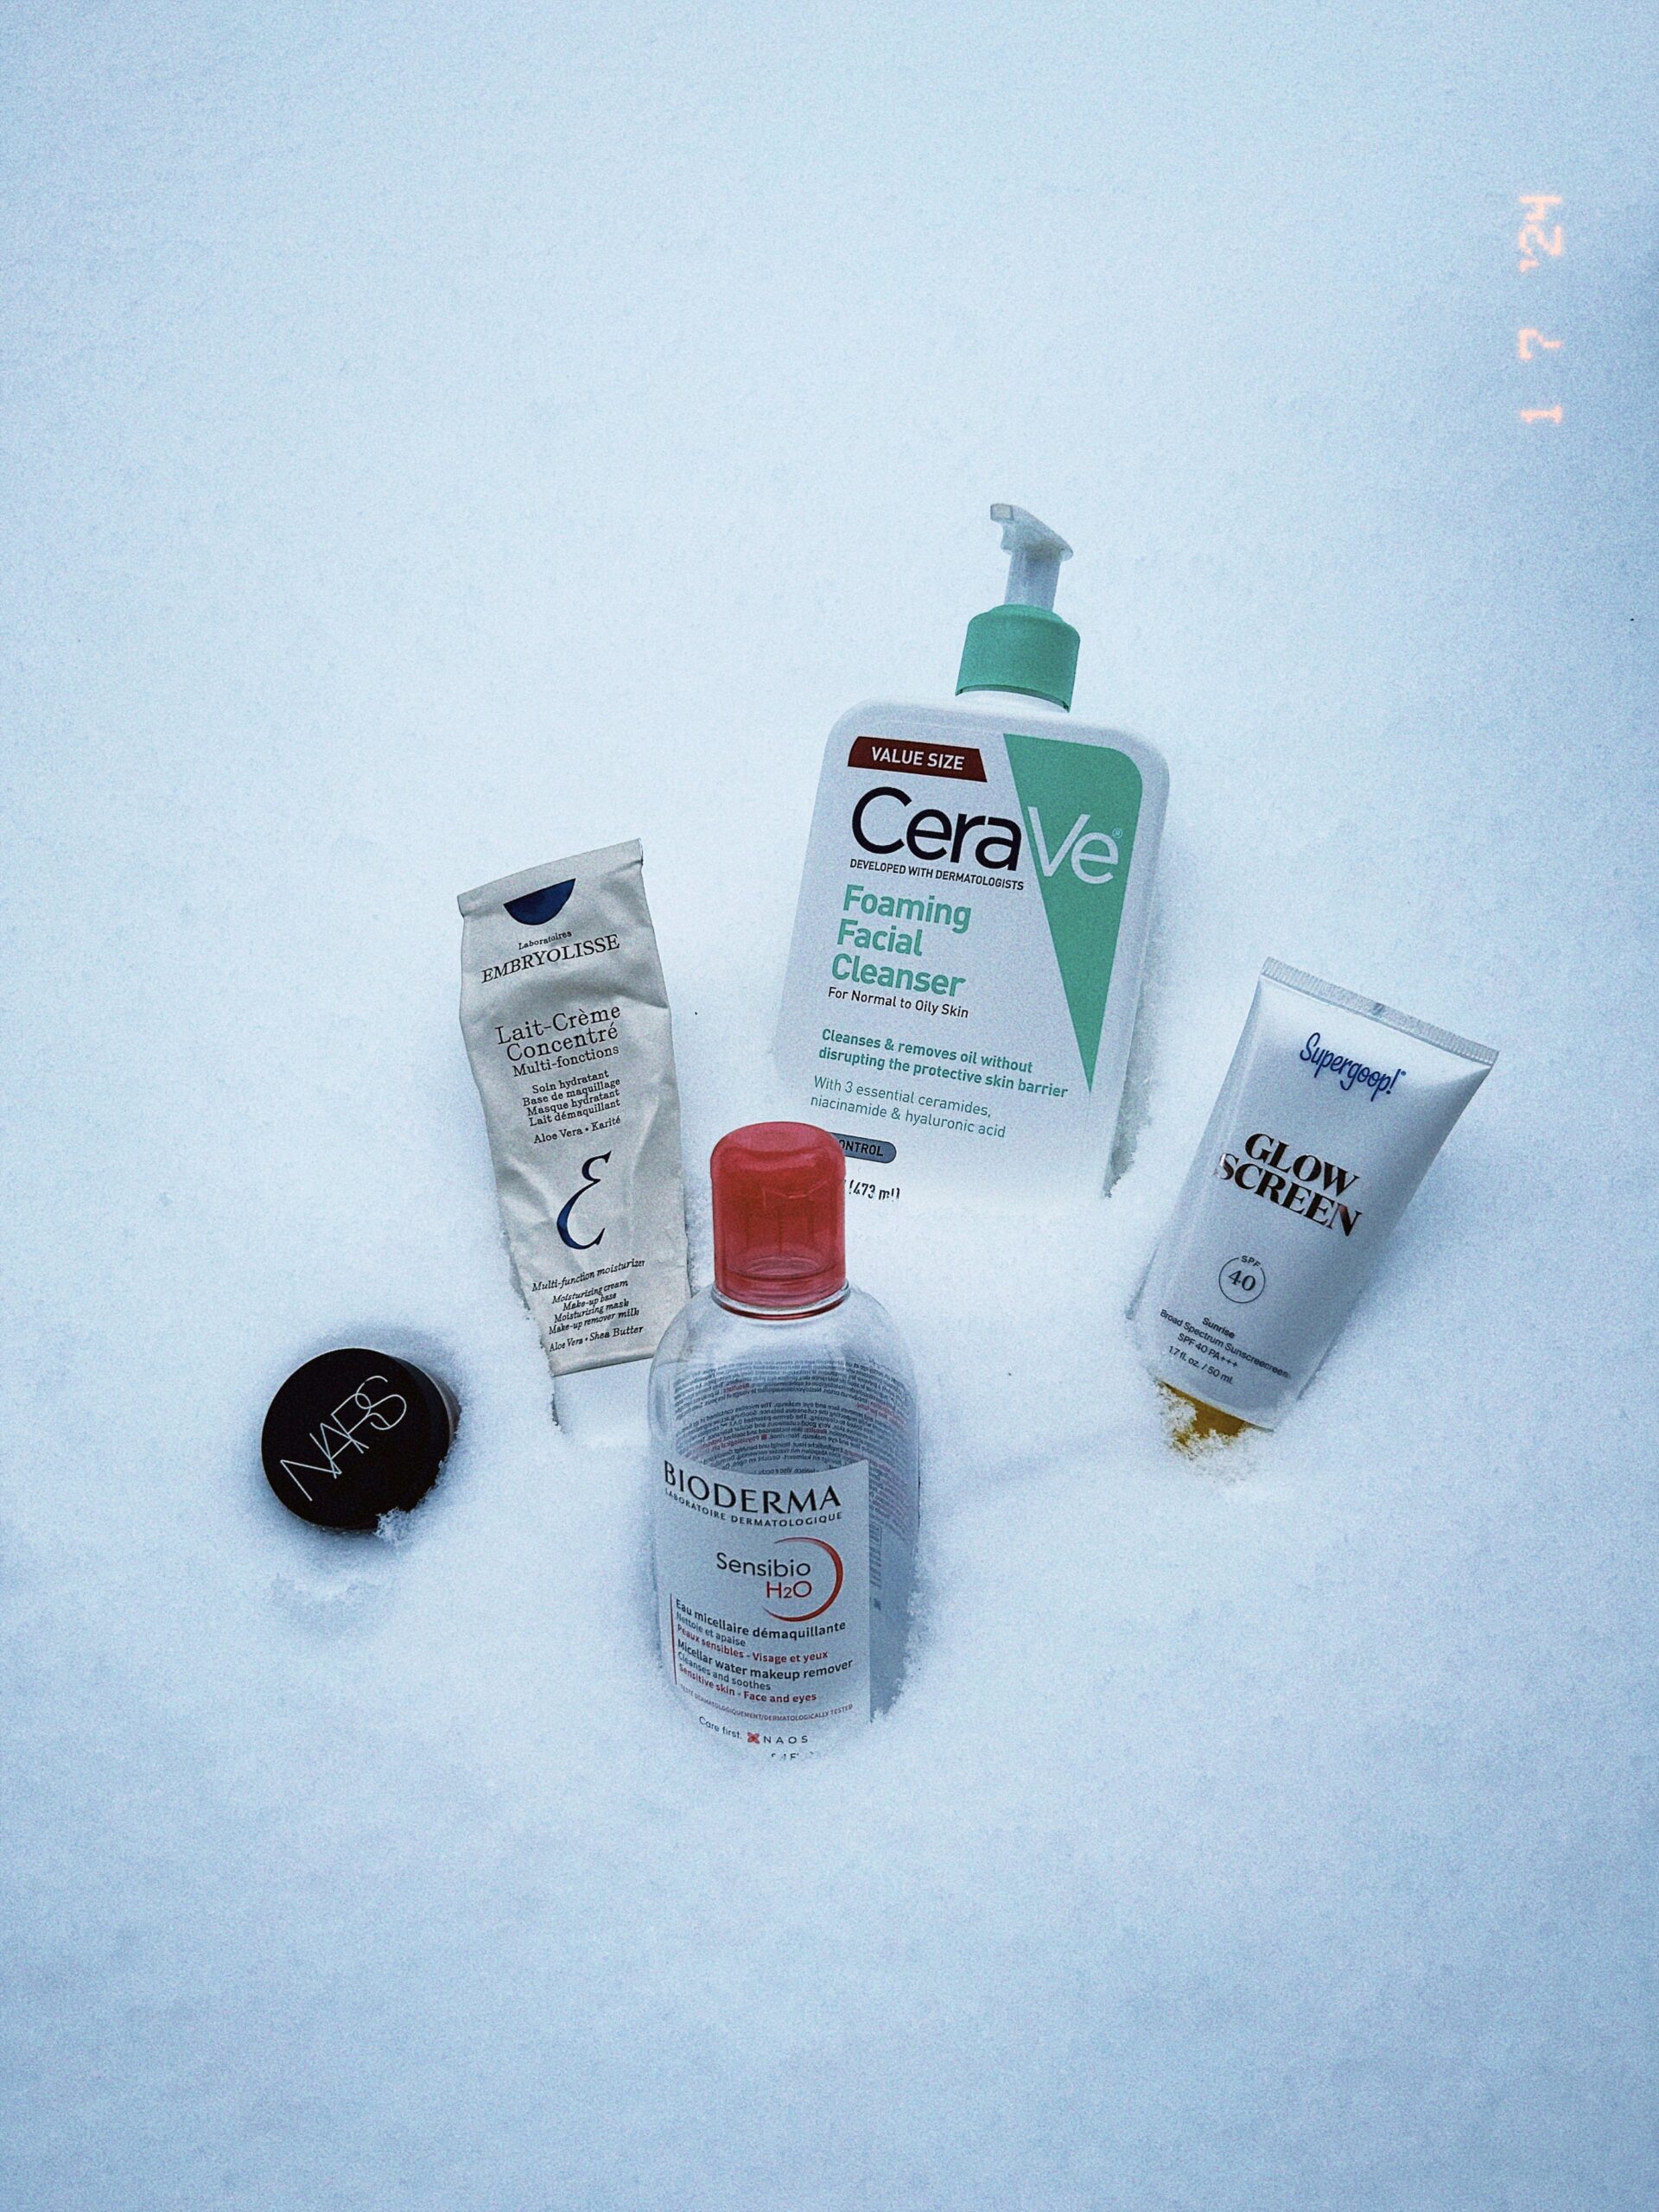 Snow-Kissed Glow: My Spotlight Ride-or-Die Beauty/Skin Products For 20-Somethings!